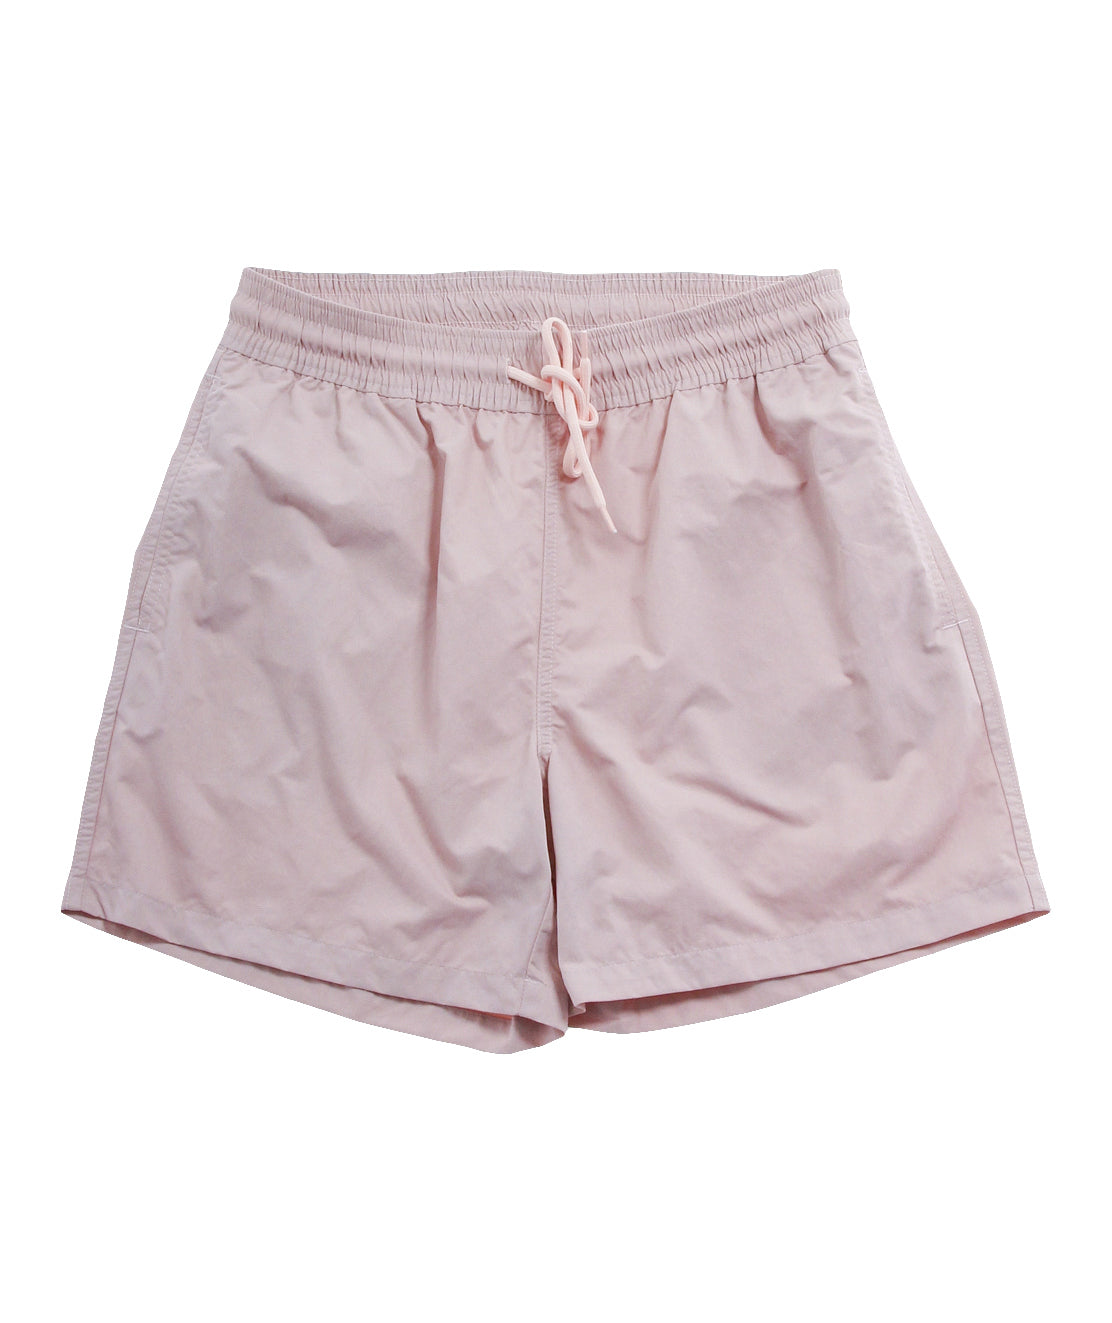 Colorful Standard Classic Swim Shorts - Faded Pink